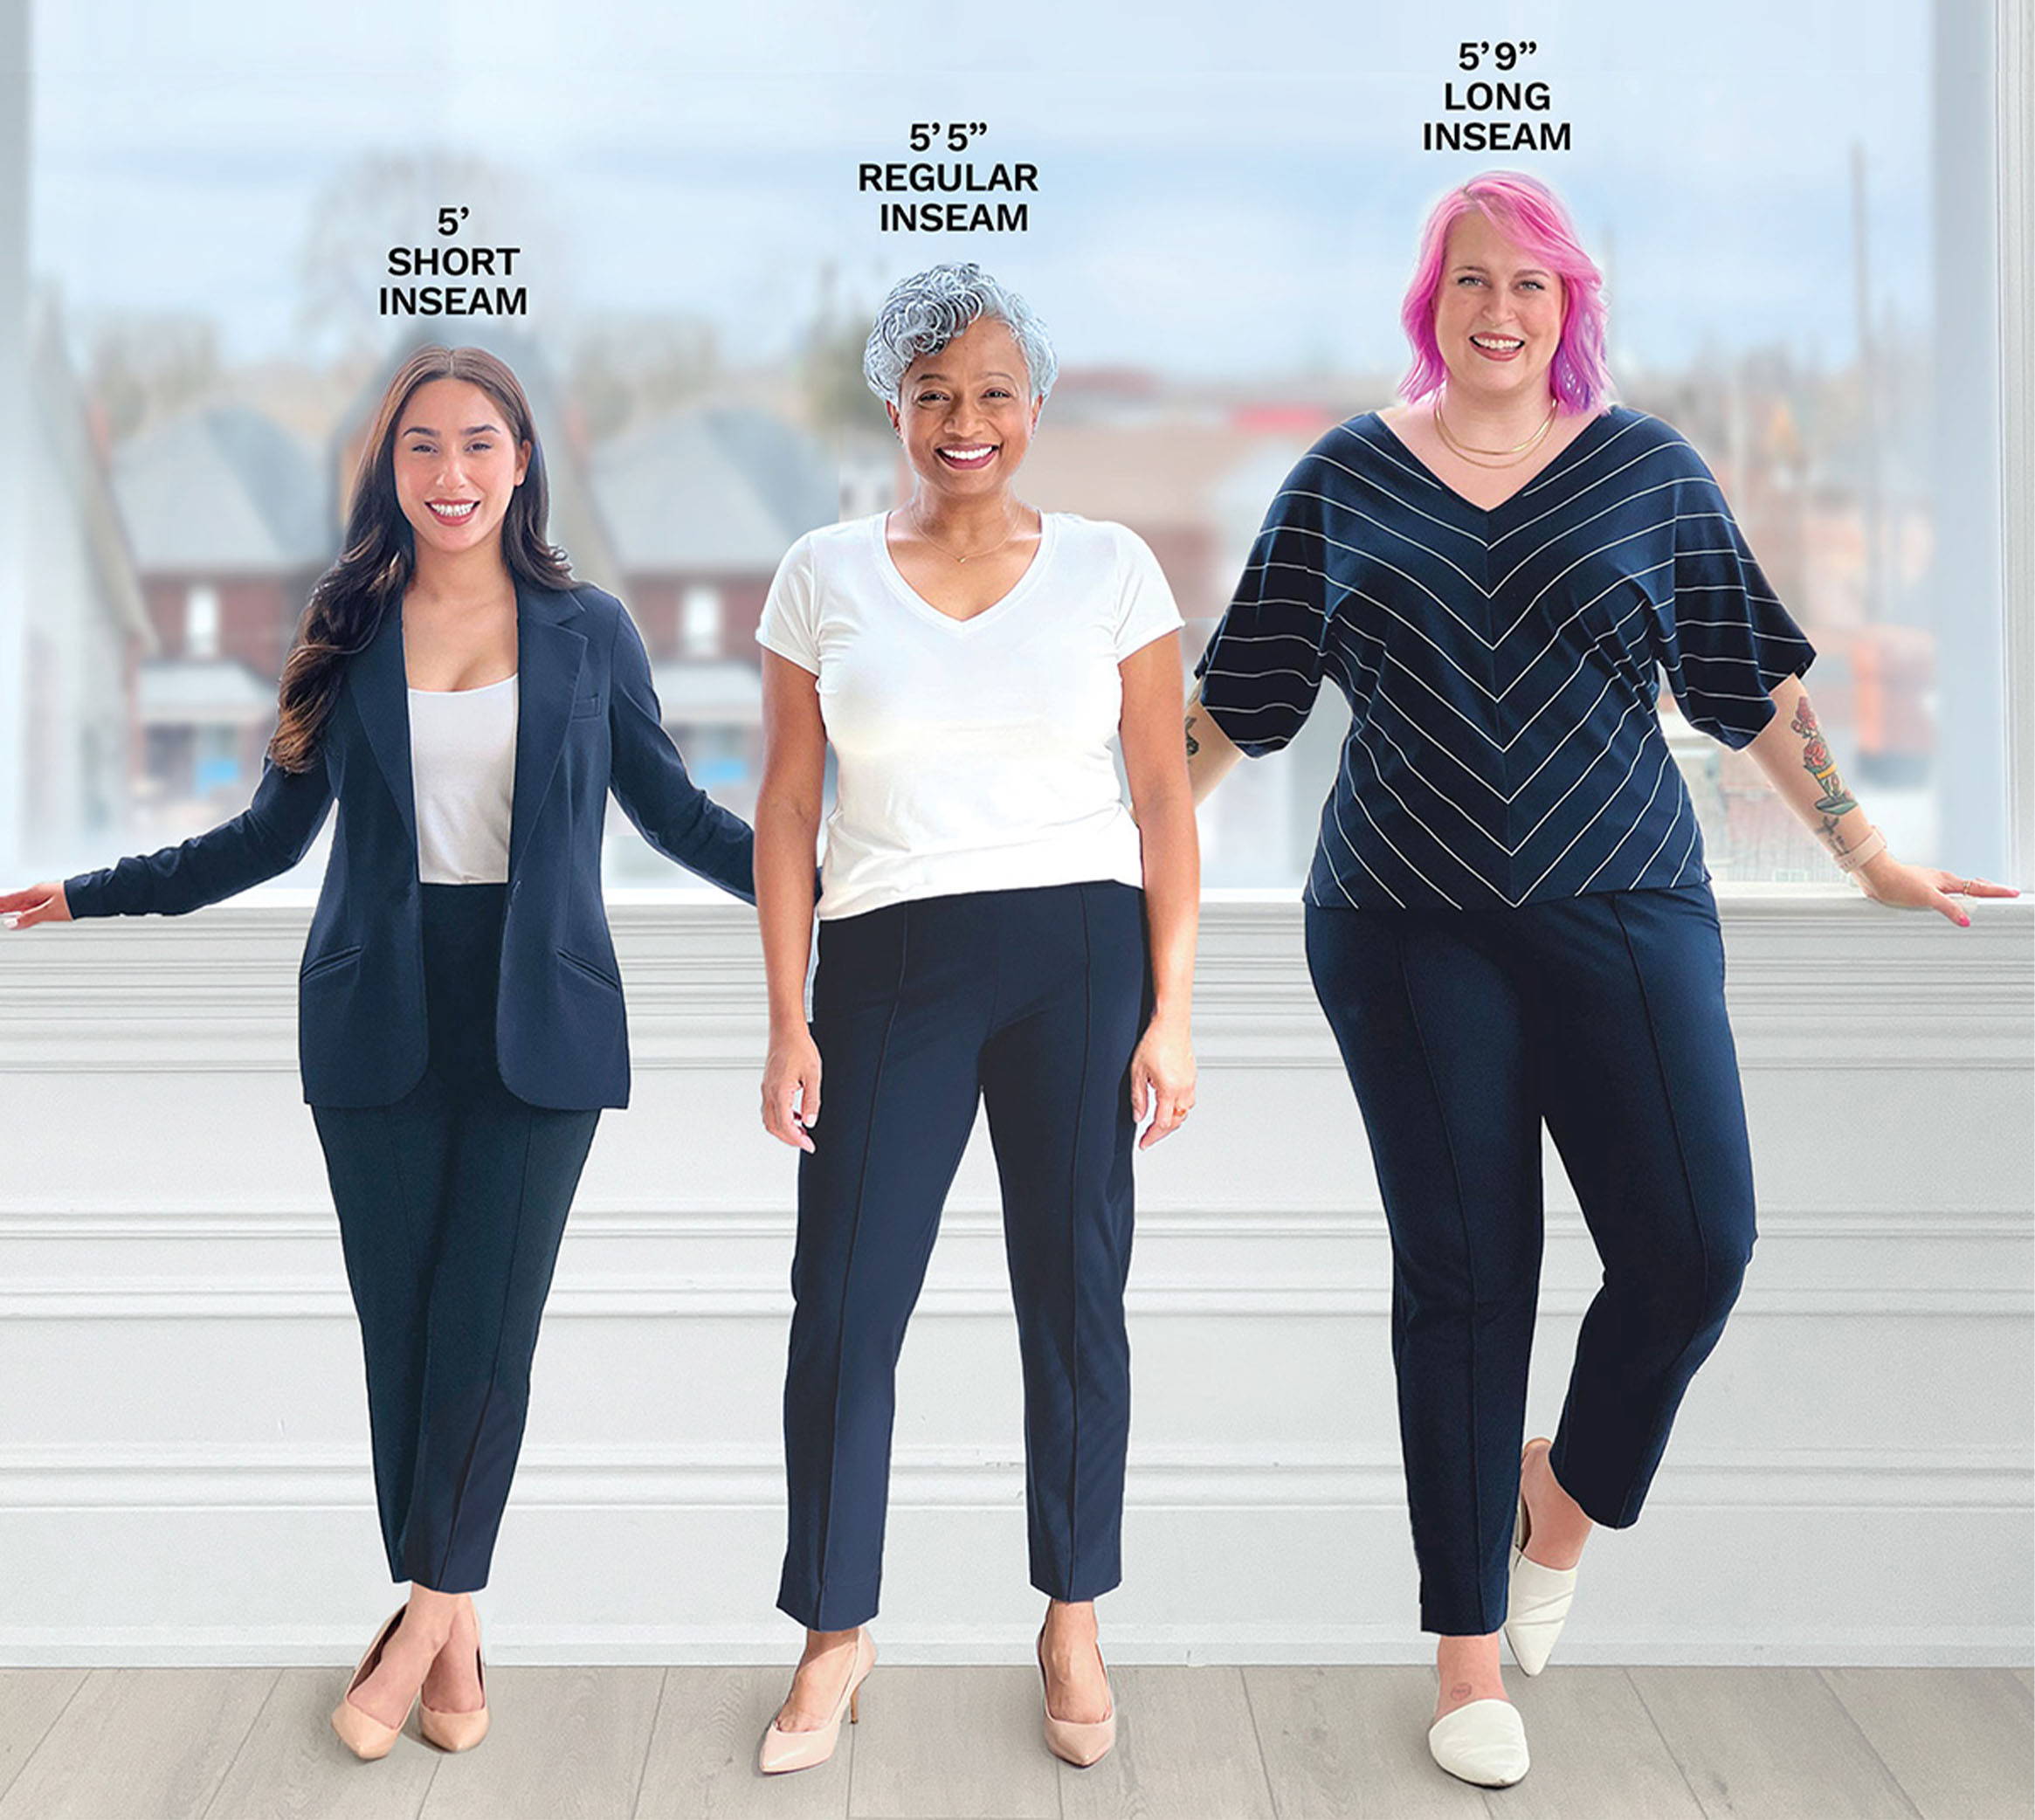 Three women different heights standing next to each other wearing Miik's Christal pull-on pintuck ankle pant in short, regular and long inseam.